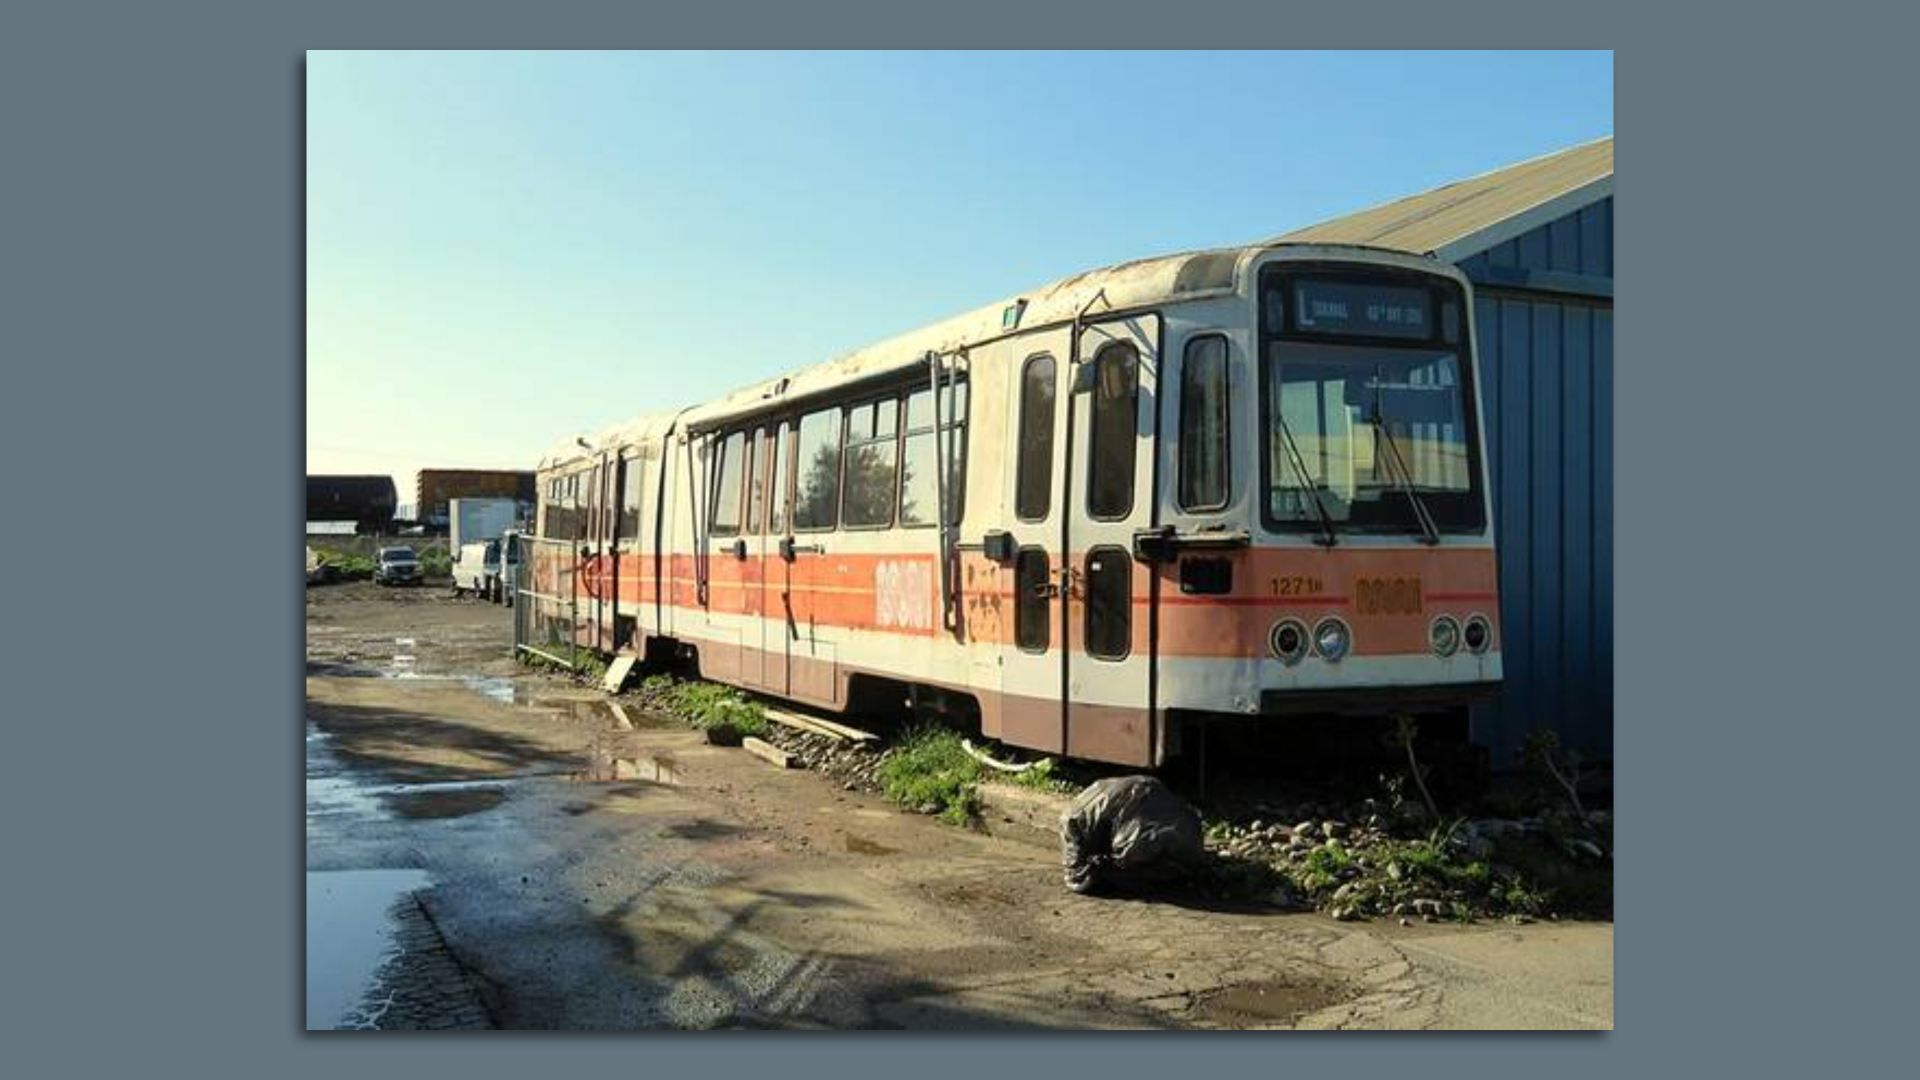 The converted Muni streetcar currently resides in a storage lot in Richmond.